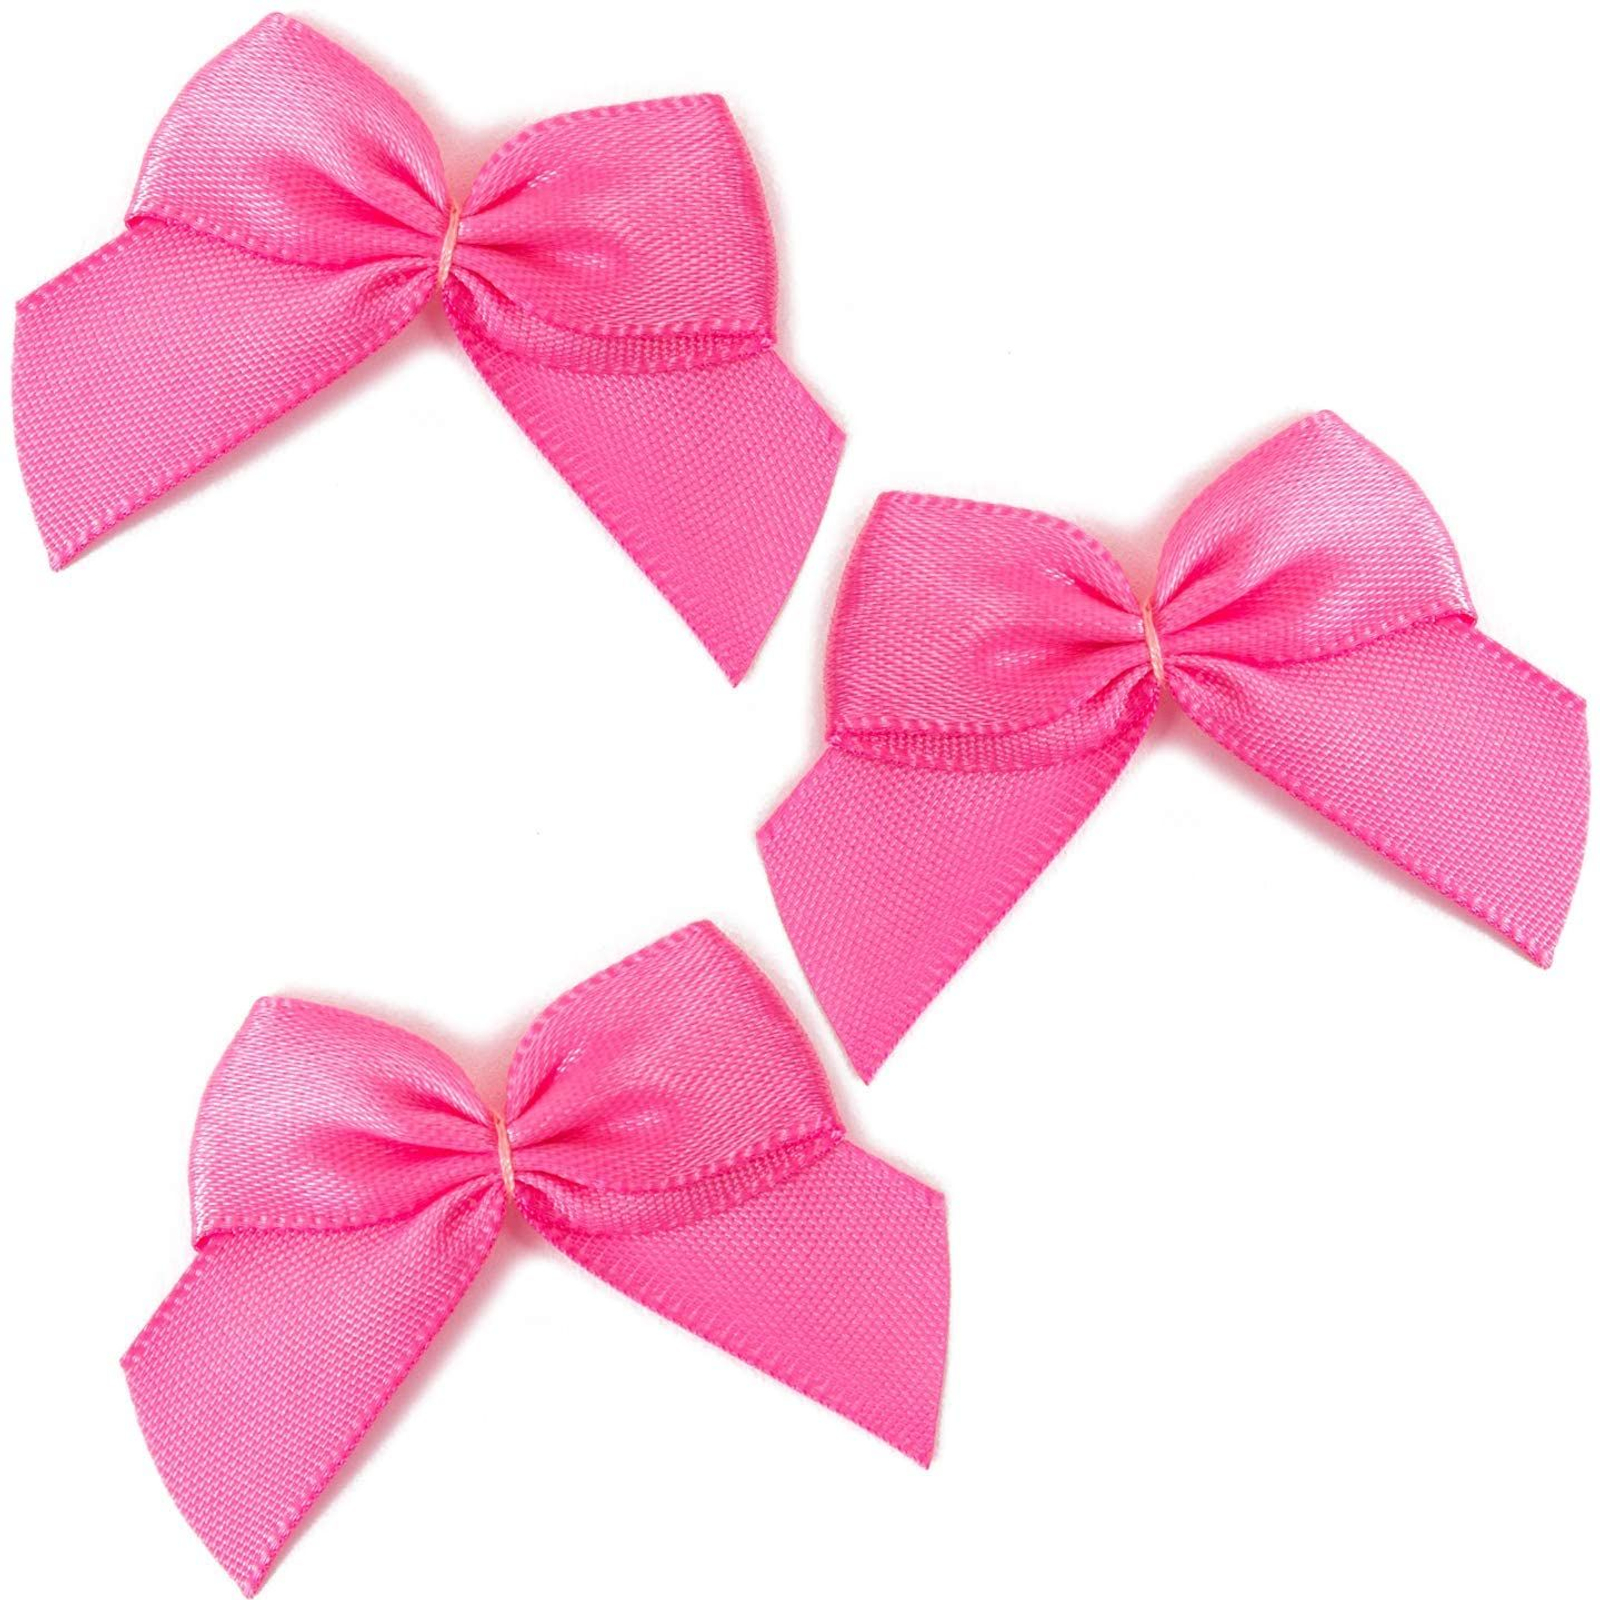 200 Pack Mini Pink Satin Ribbon Bows with Self-Adhesive Tape for Crafts, Gift Present Wrapping, Christmas Wreath, 1.5" - image 1 of 7